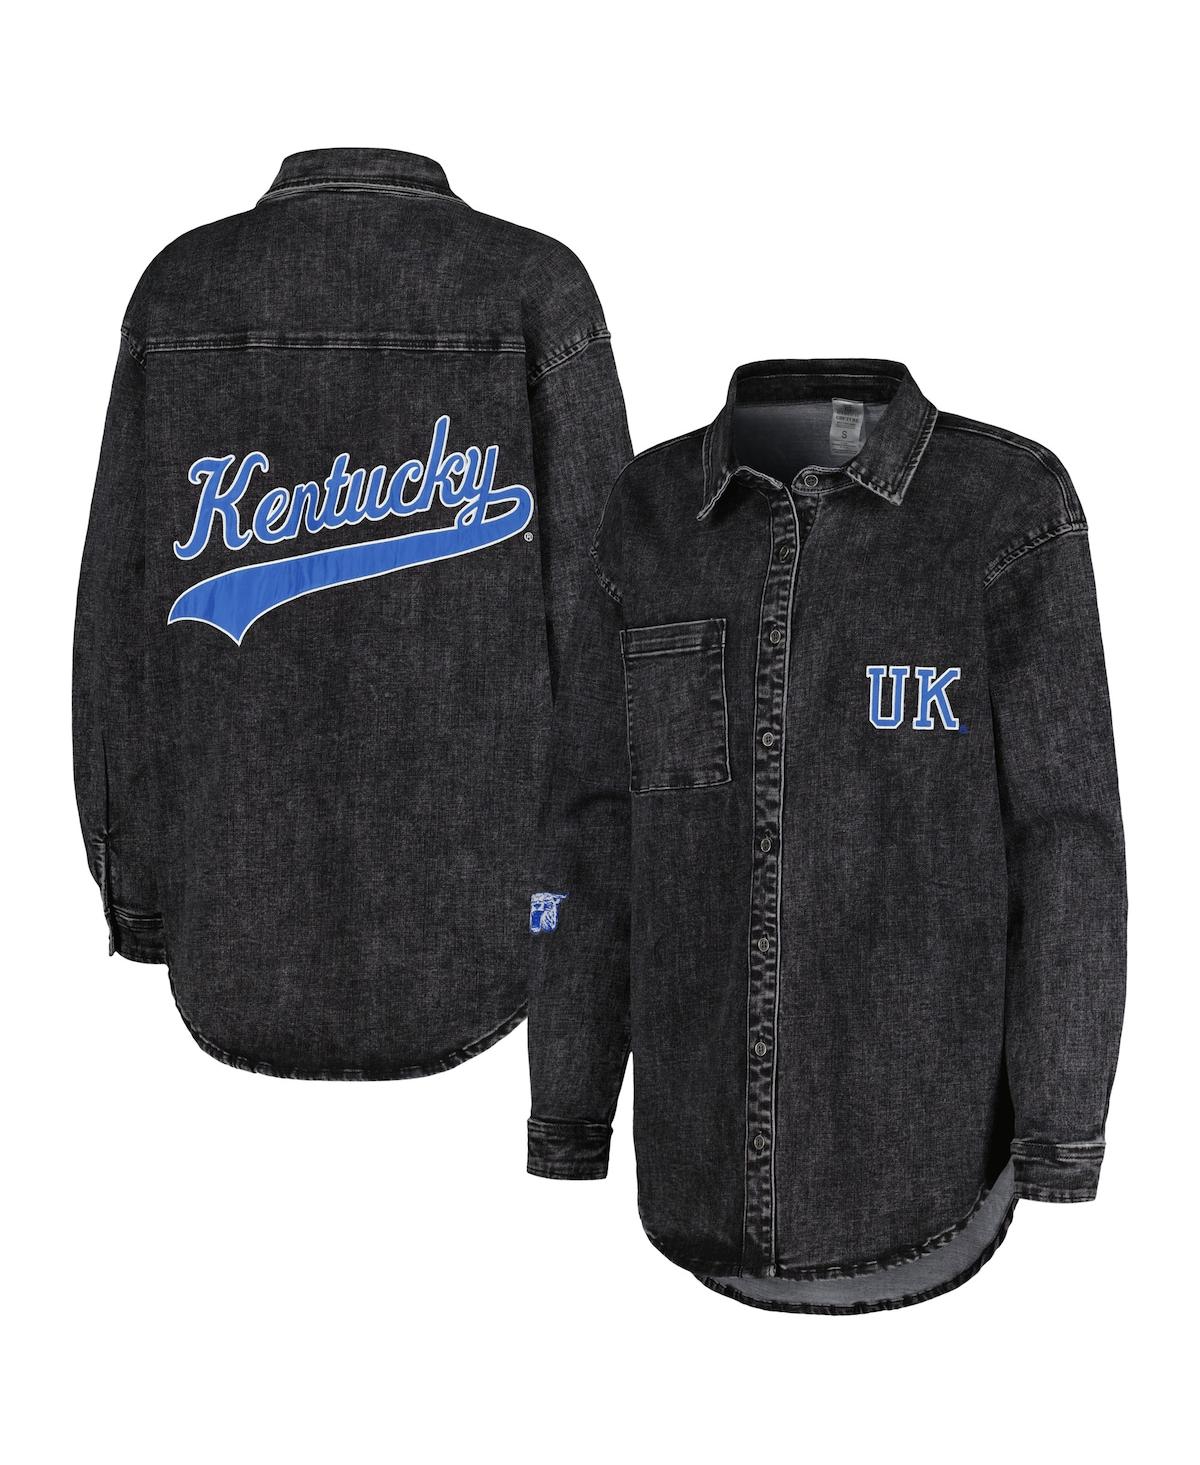 Gameday Couture Women's  Charcoal Kentucky Wildcats Multi-hit Tri-blend Oversized Button-up Denim Jac